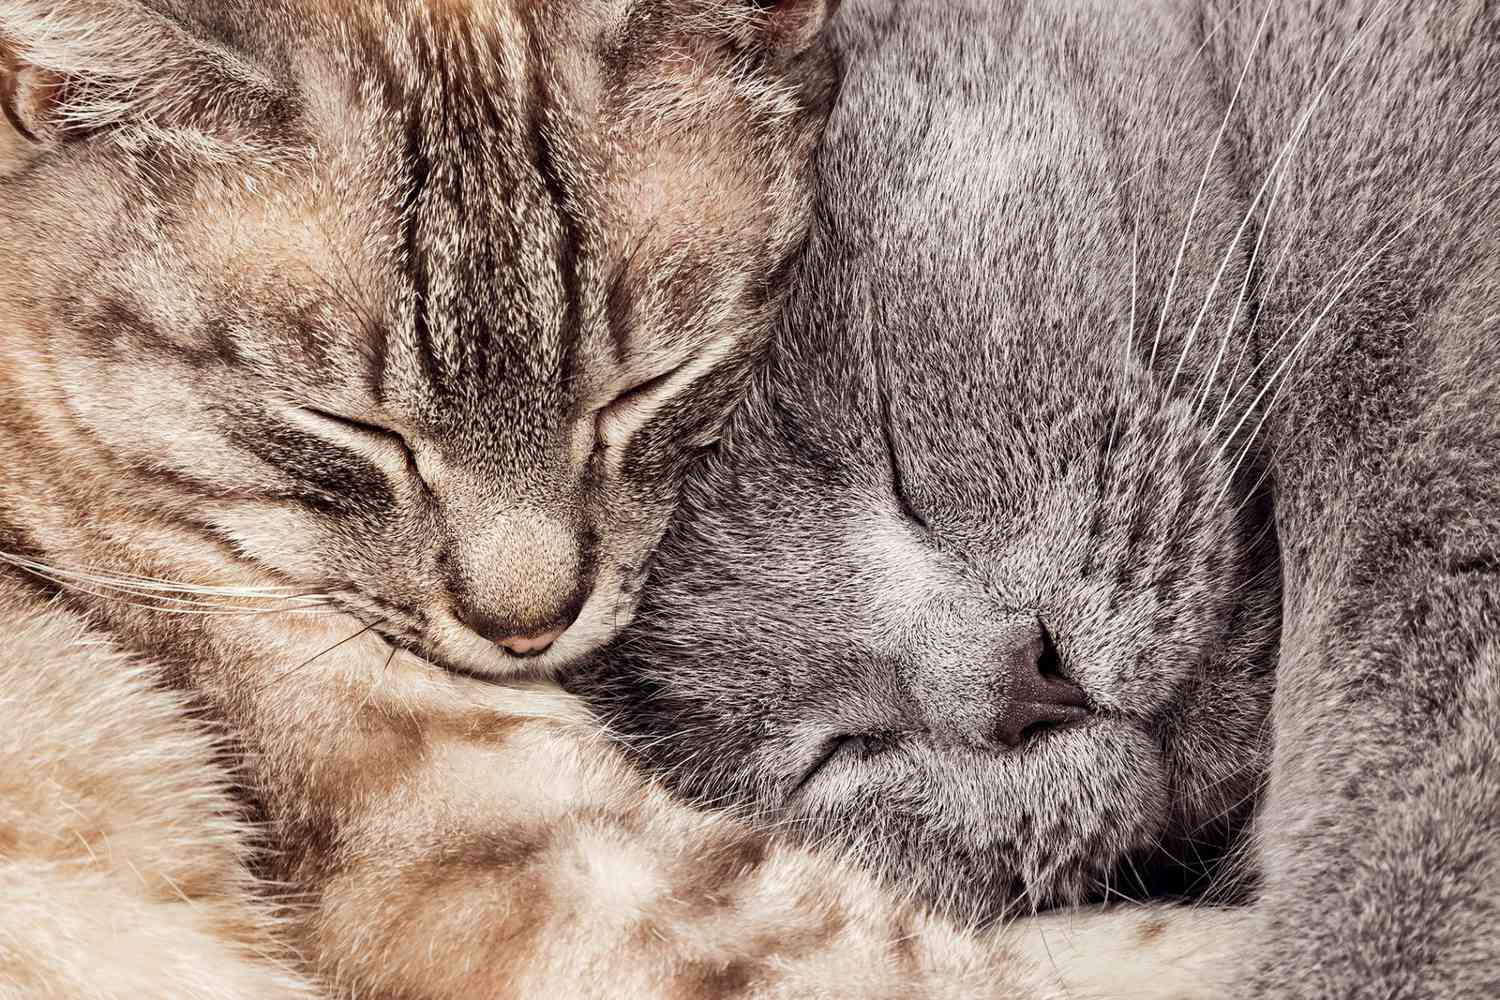 two cat's snuggling together; full-circle cat adoption